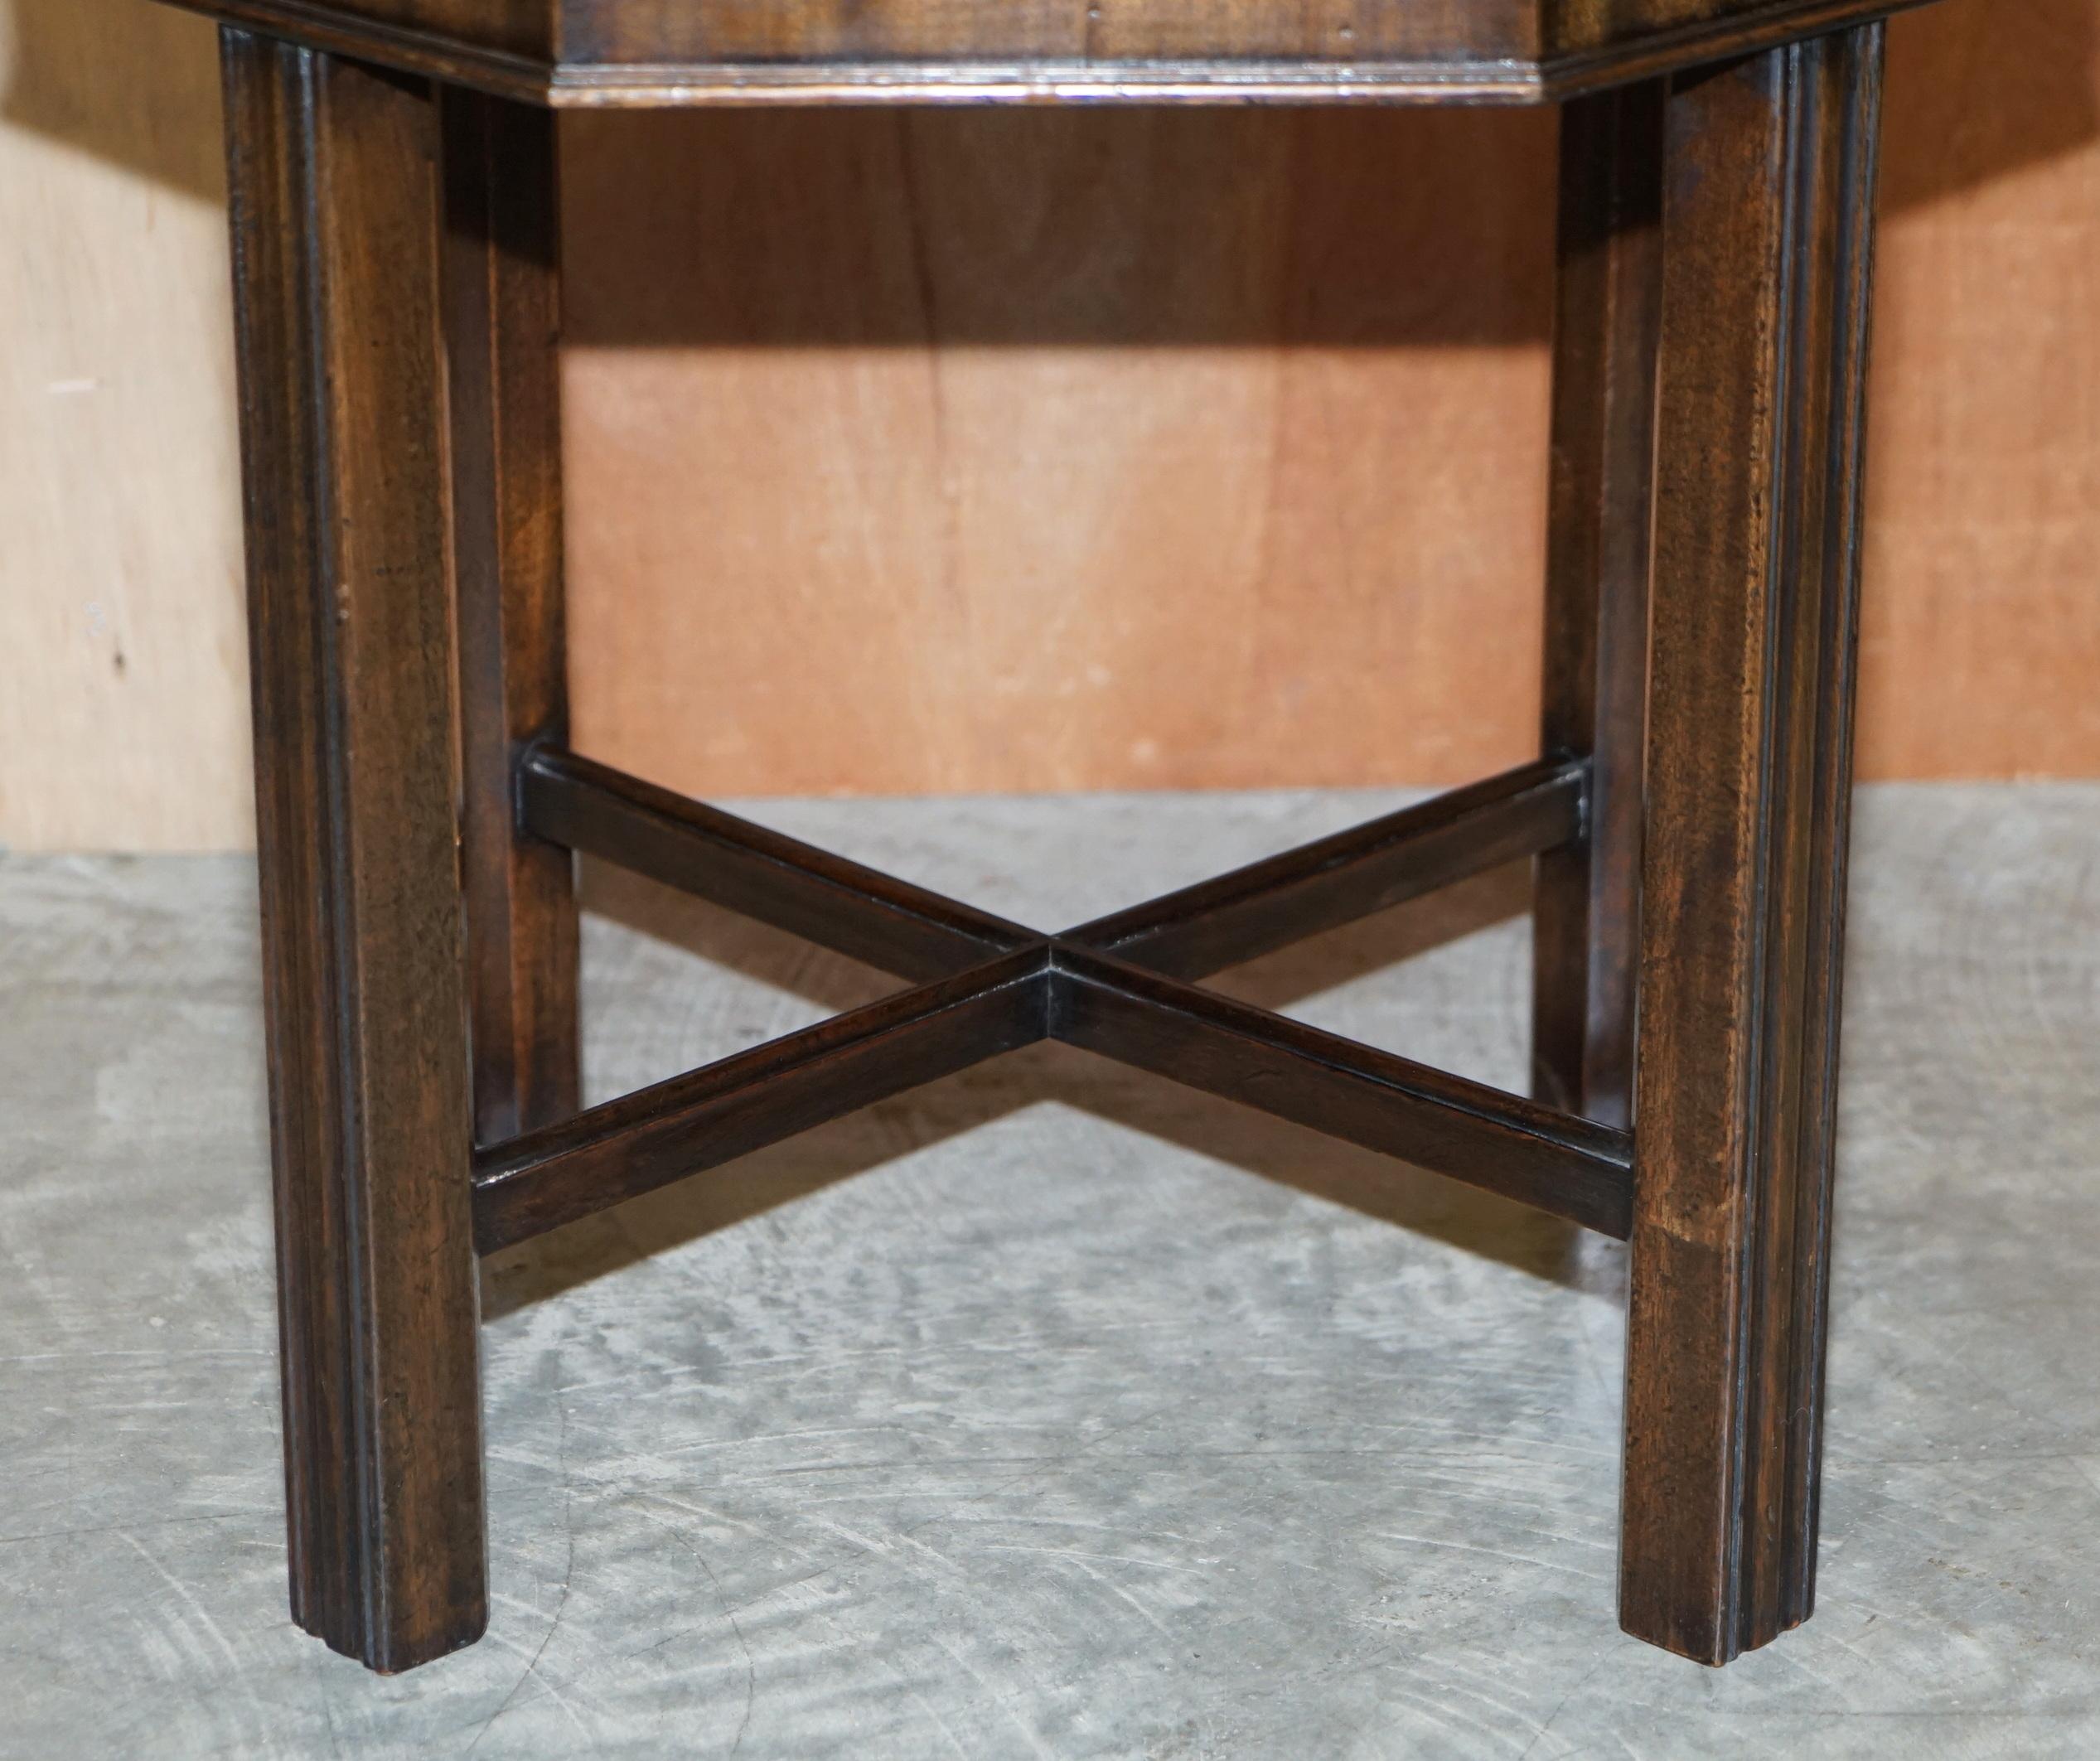 Early 20th Century Antique Thomas Chippendale Fret Work Carved Card Games Tray Table Removable Top For Sale